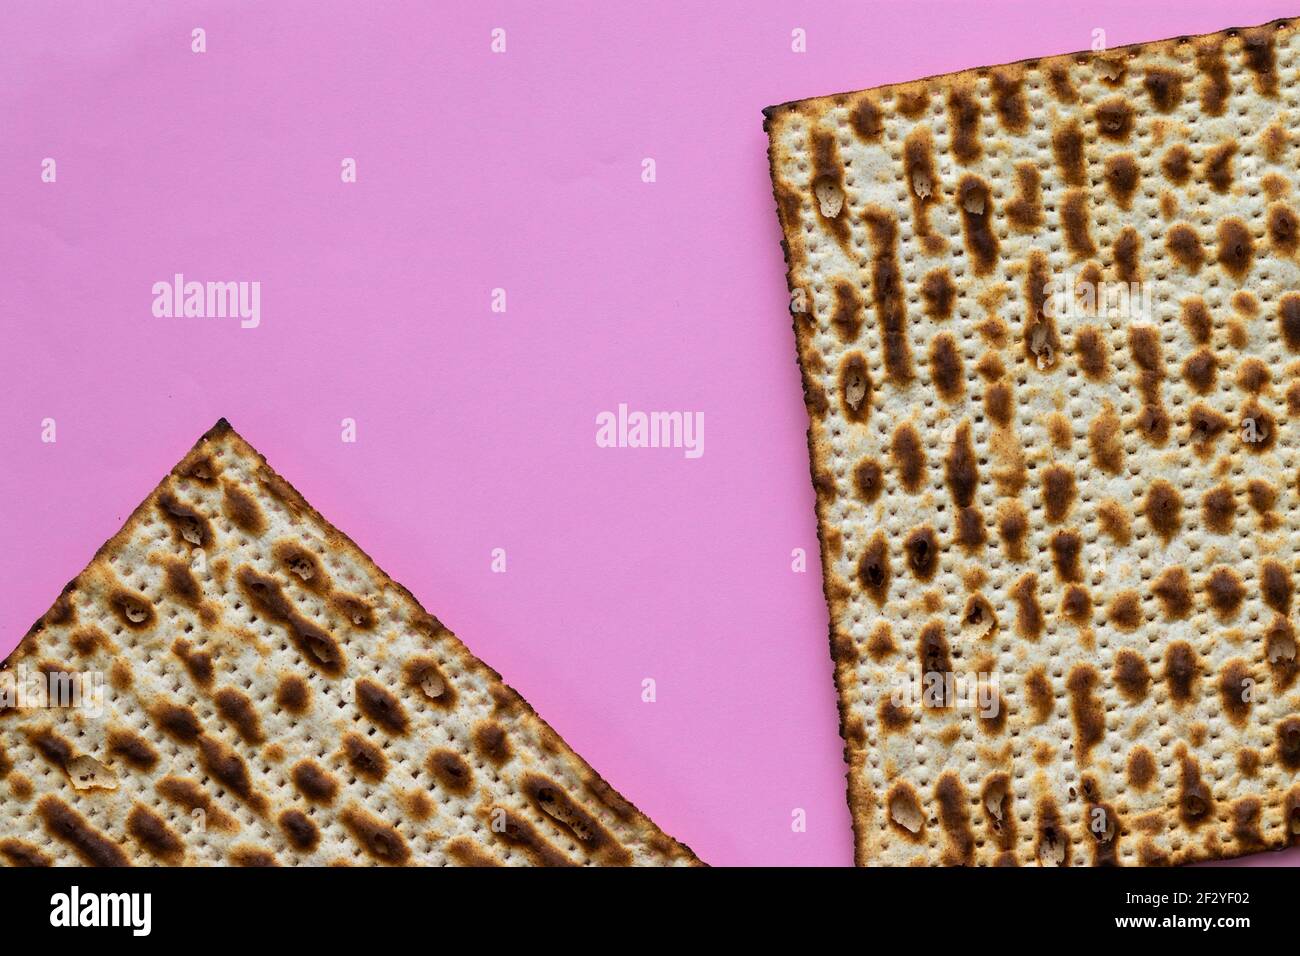 A close-up of two matzahs - bread for the Jewish Passover, on a pink background Stock Photo